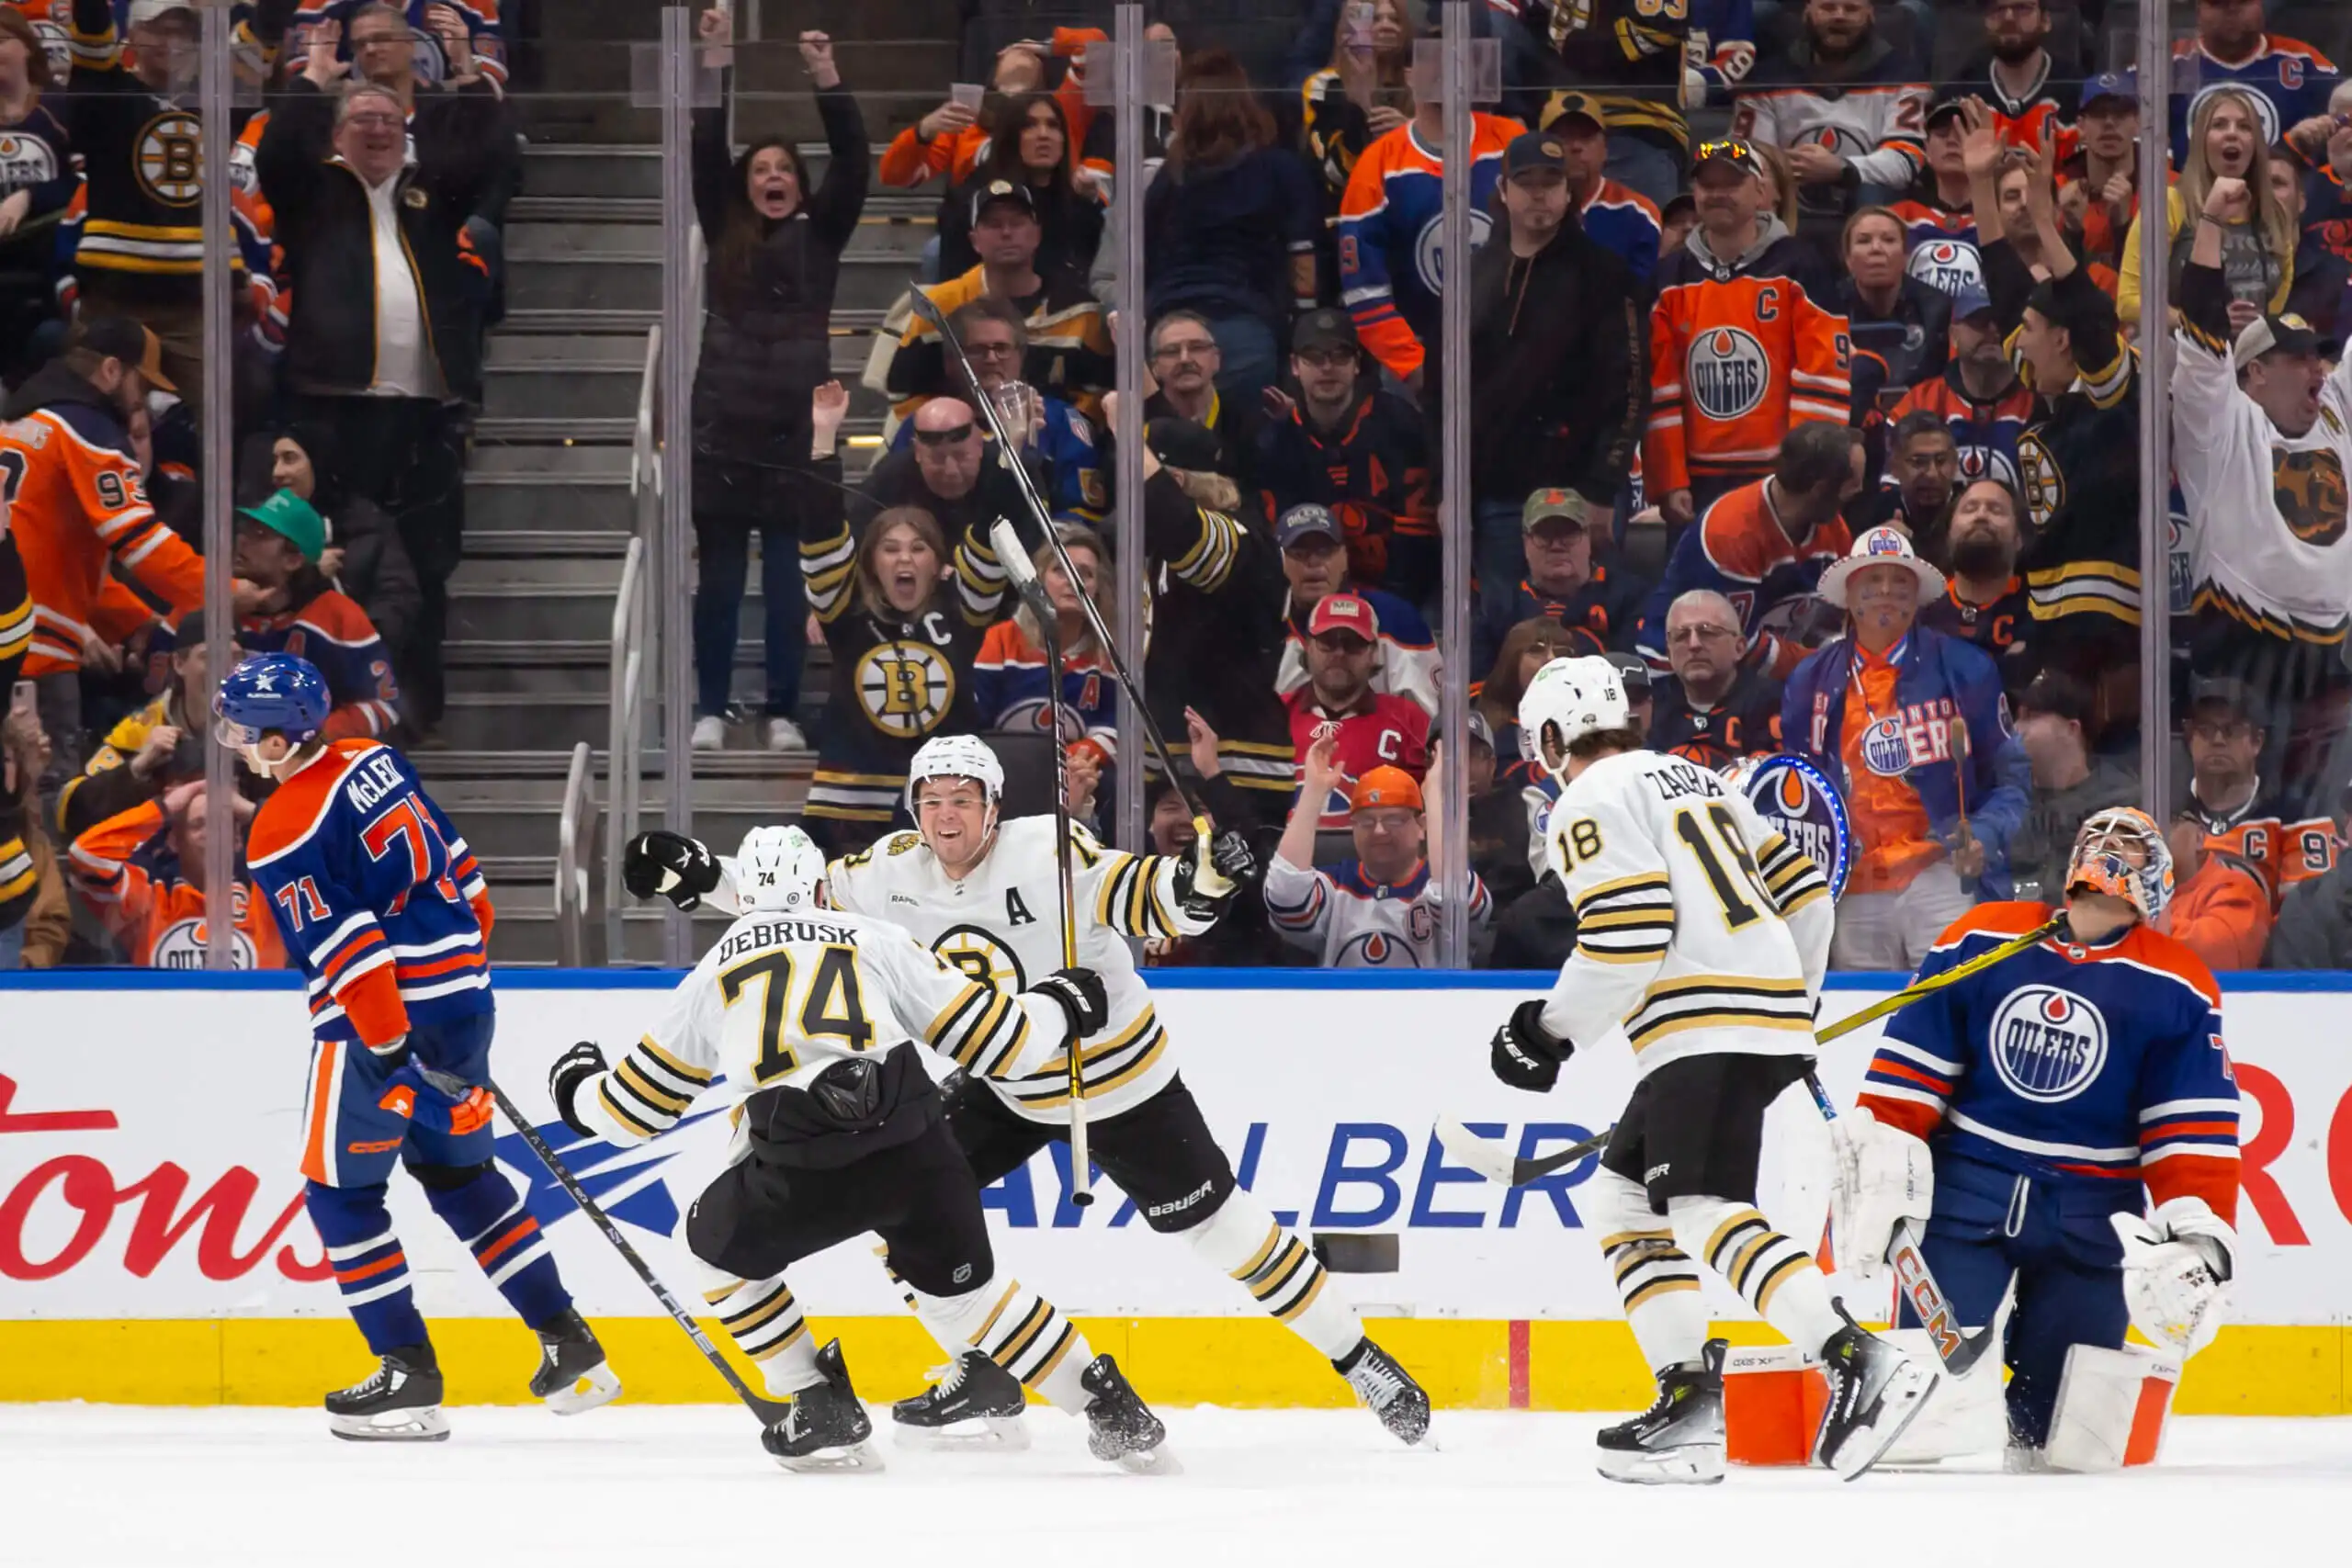 Loss to Bruins highlights Oilers need for increased forward depth